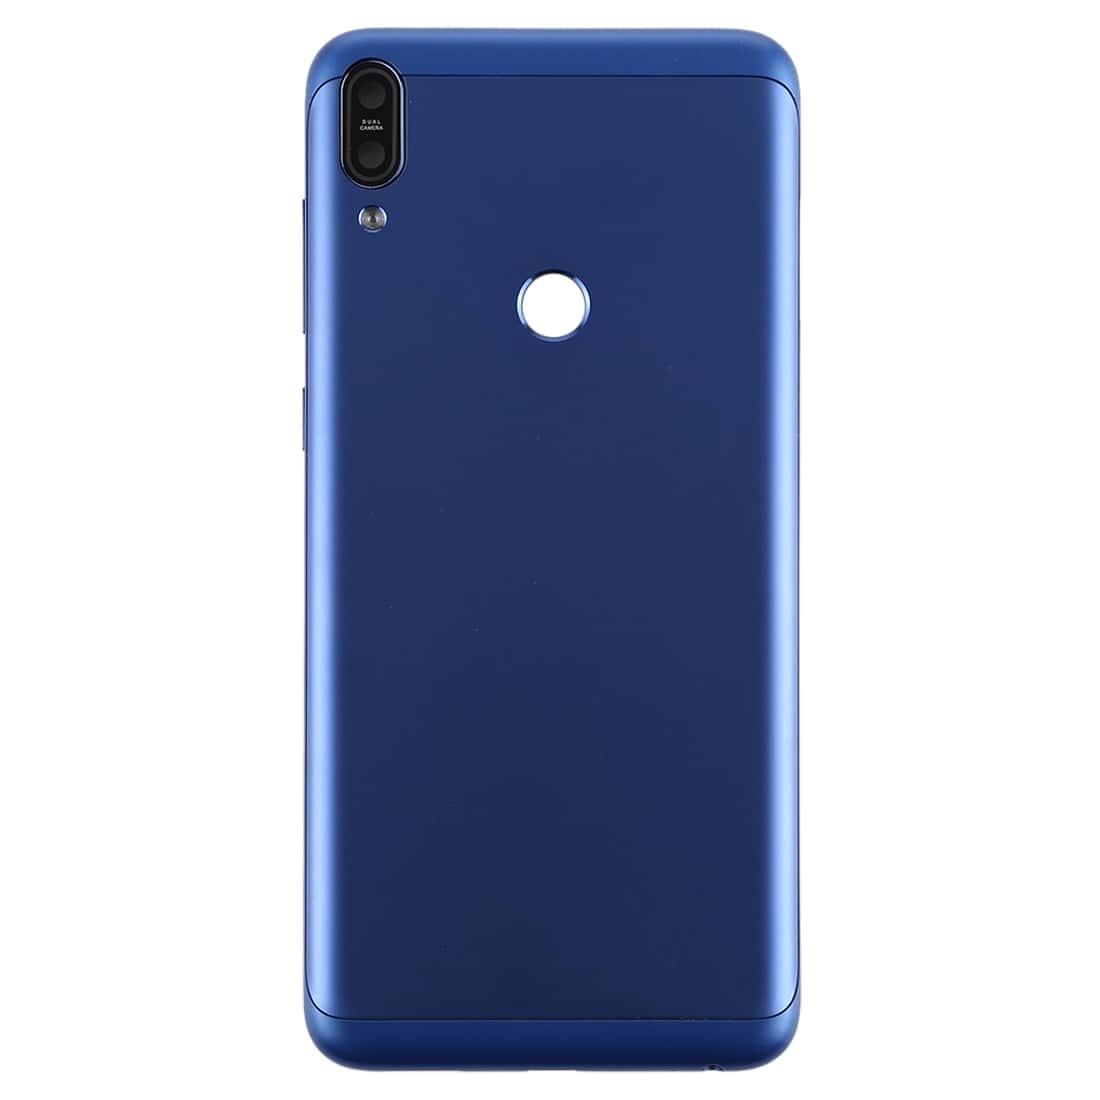 Back Panel Housing Body for Asus Zenfone Max Pro M1 Blue with Camera Lens